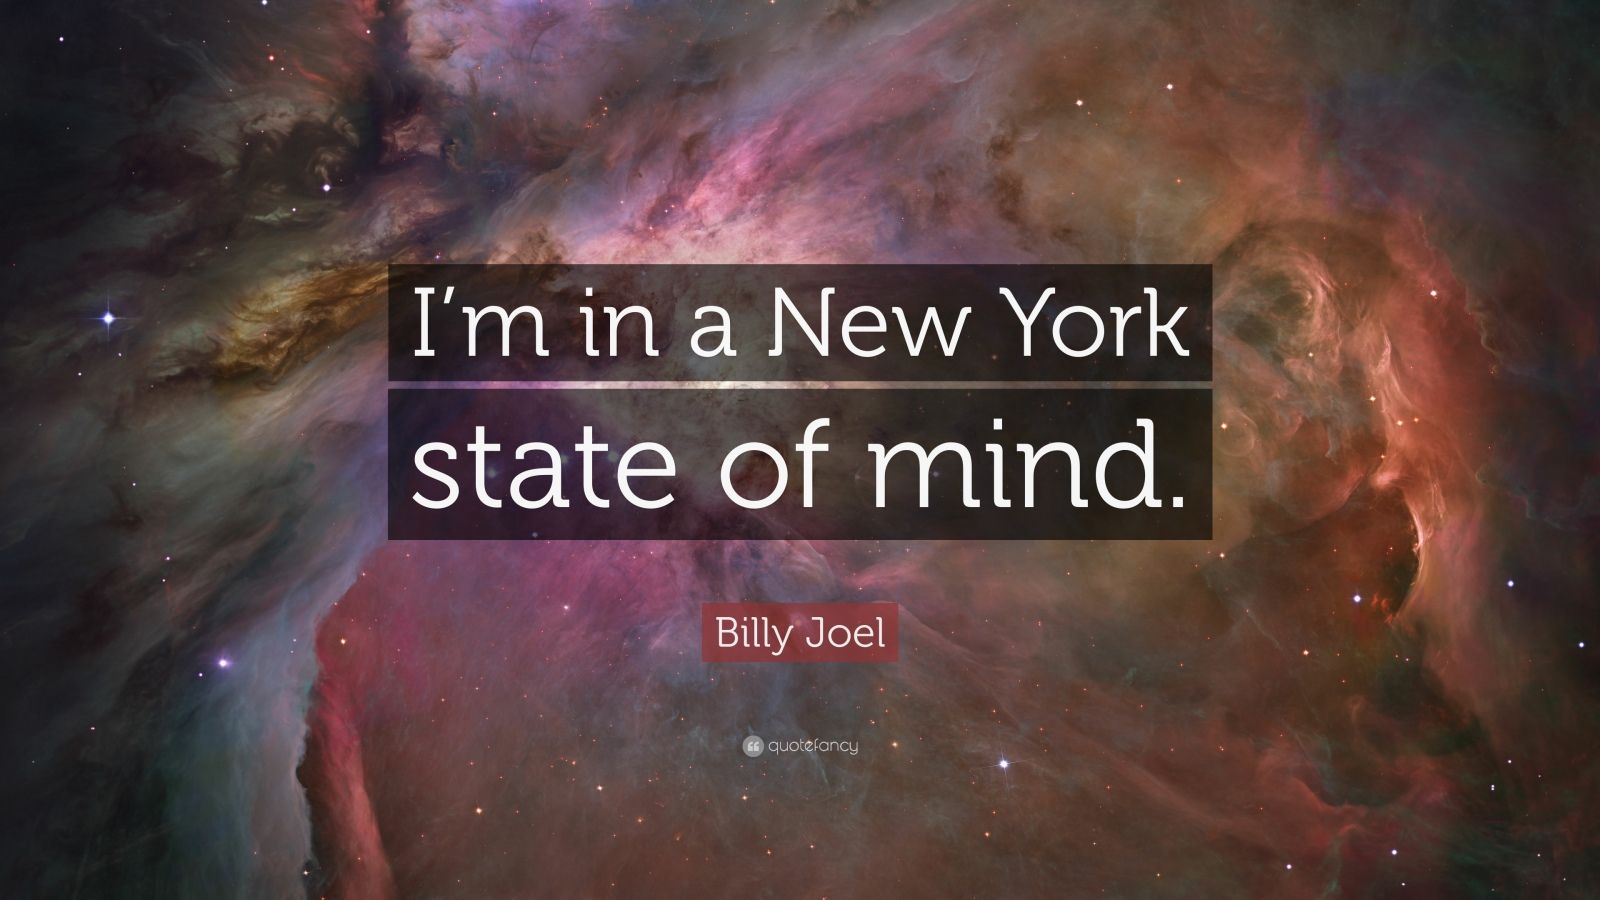 Billy Joel Quote: "I'm in a New York state of mind." (10 wallpapers ...